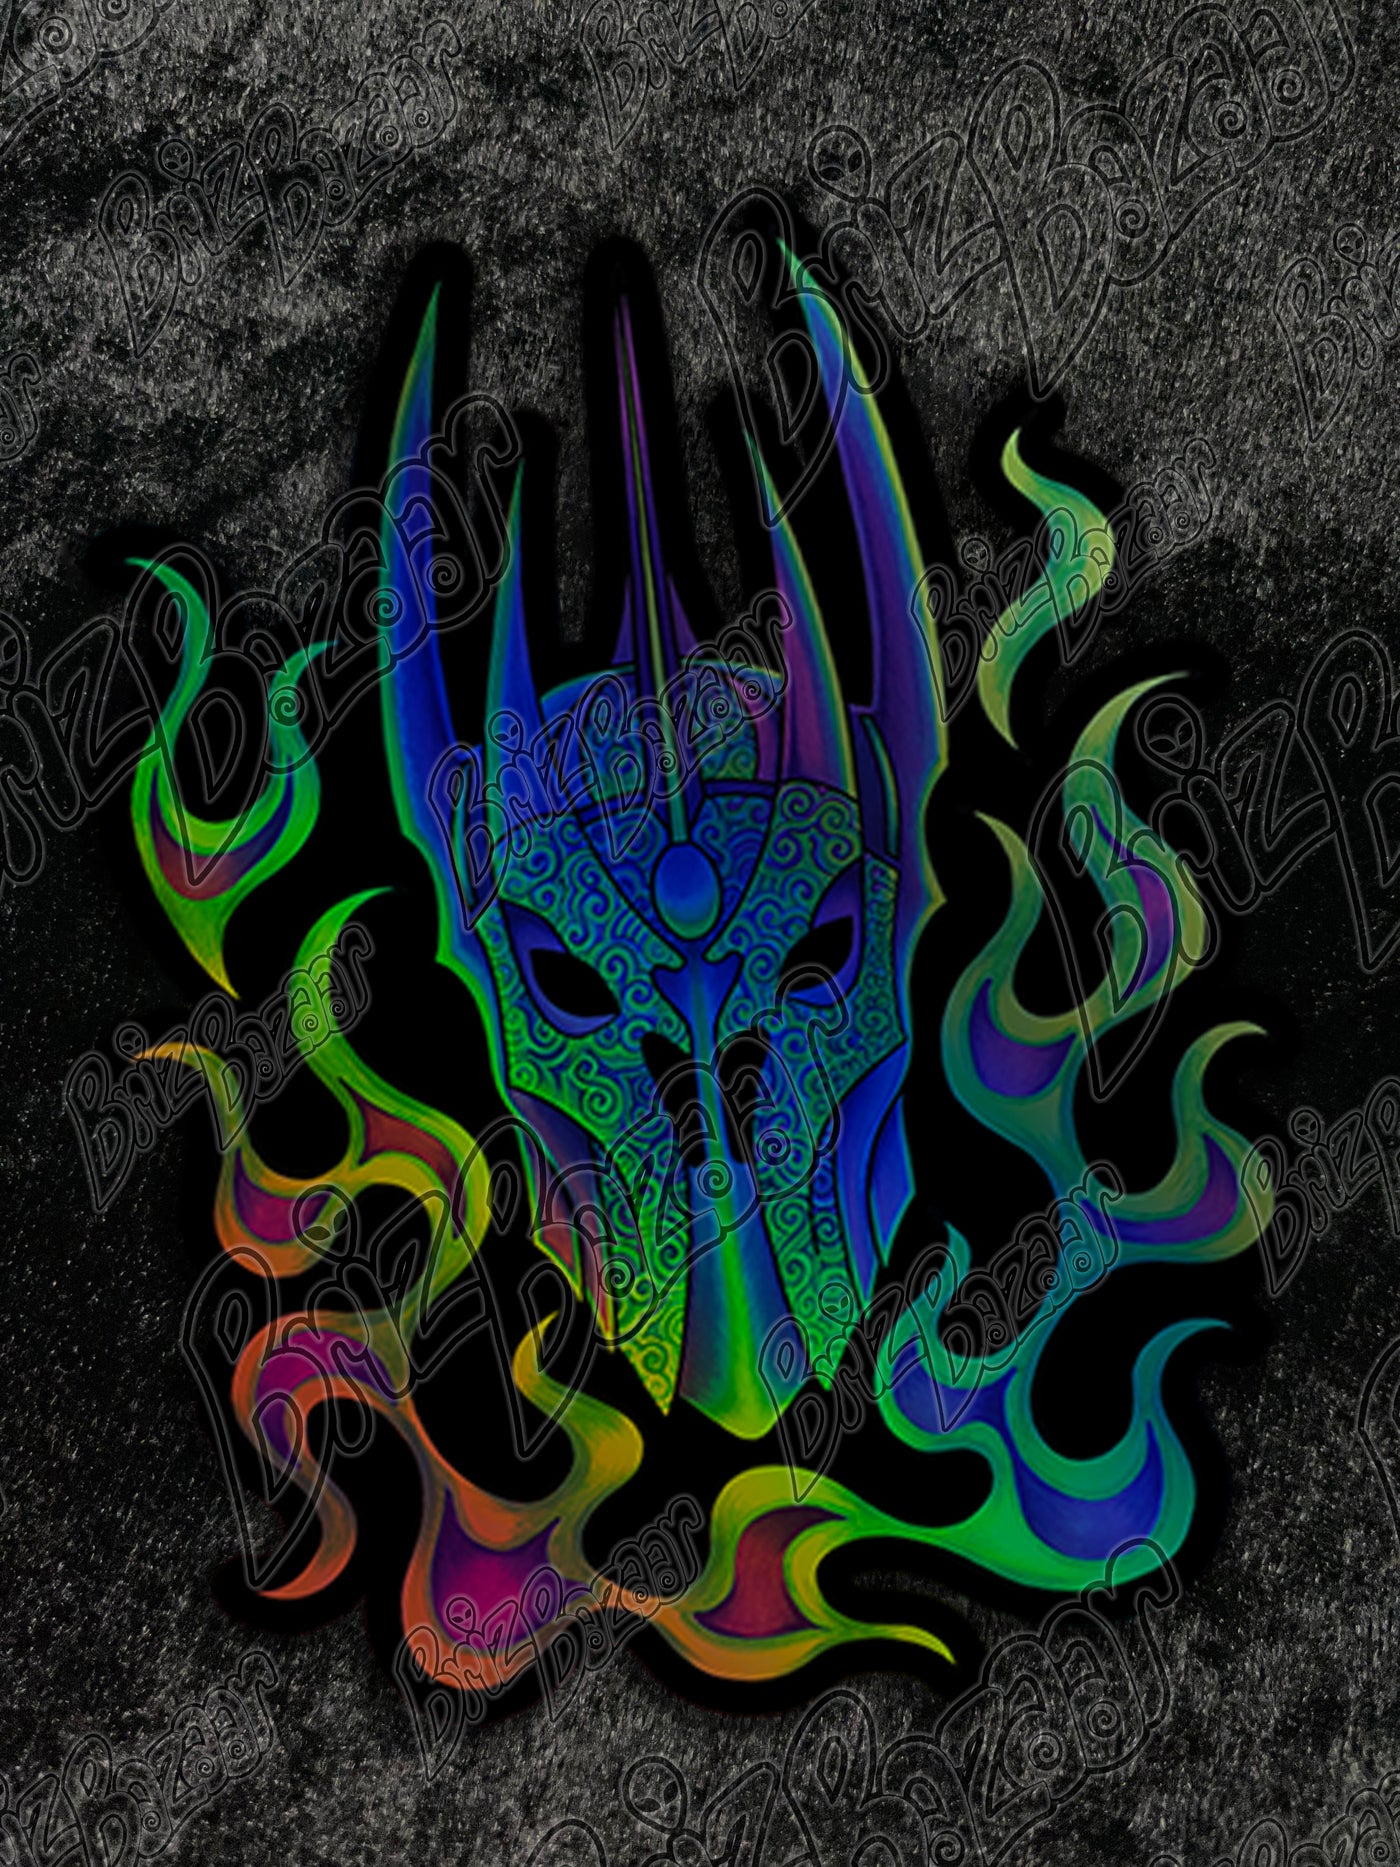 Holographic sticker of Zzauron